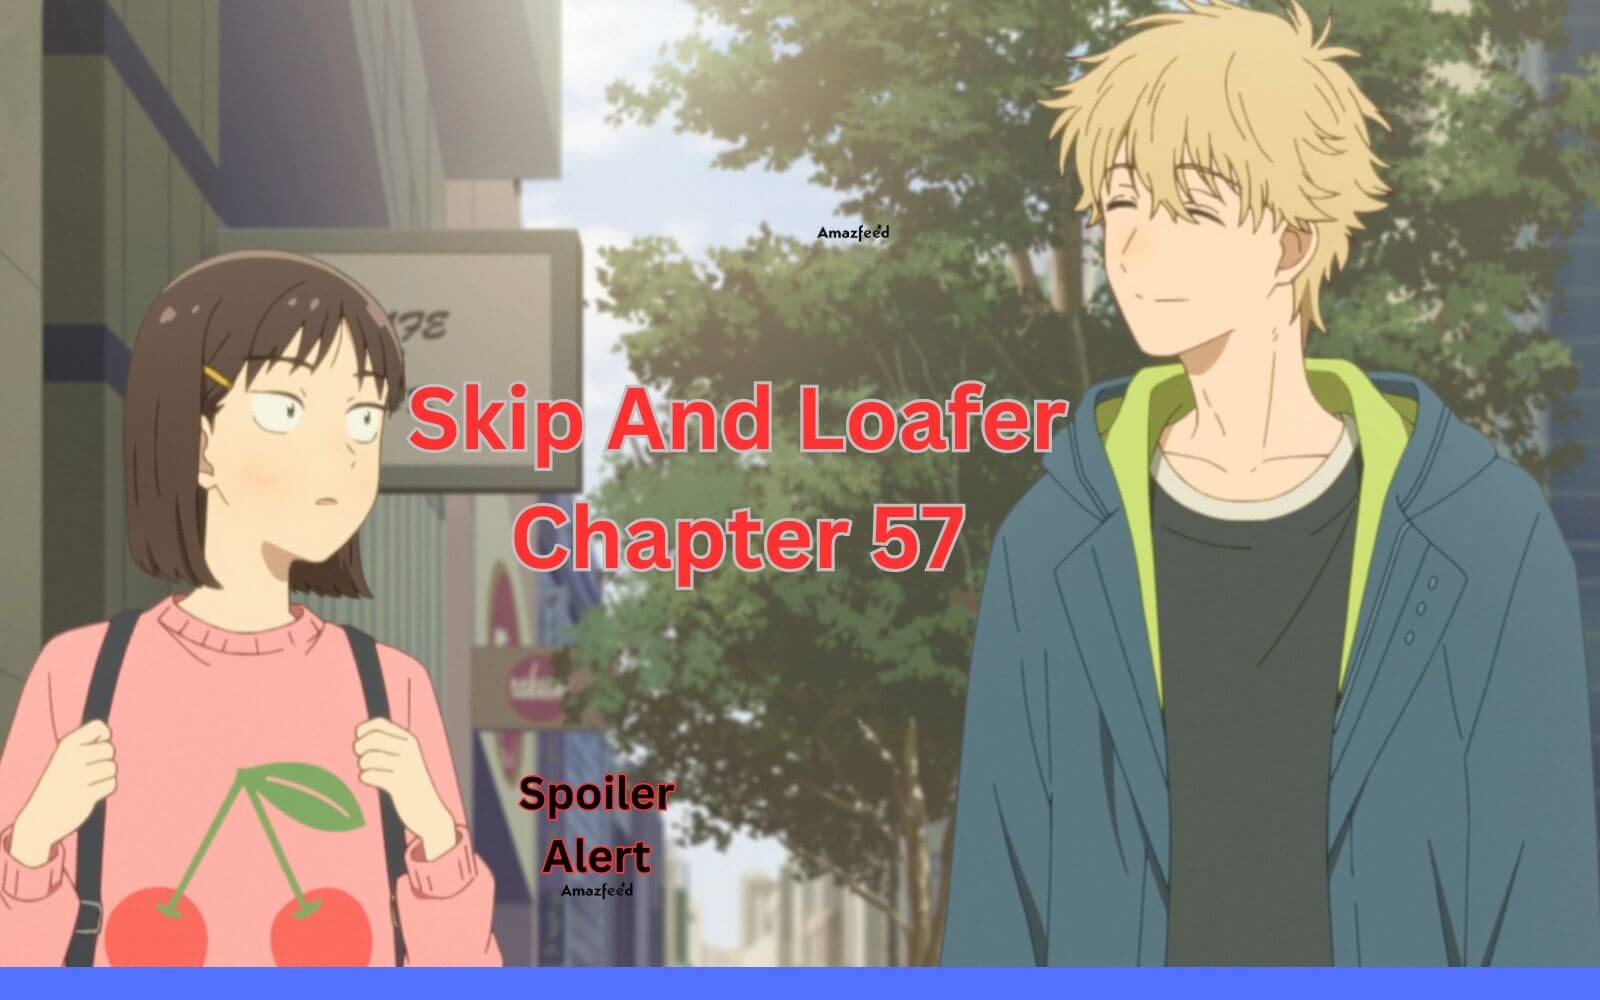 Skip And Loafer Chapter 57 Release Date - A Summer I Will Never